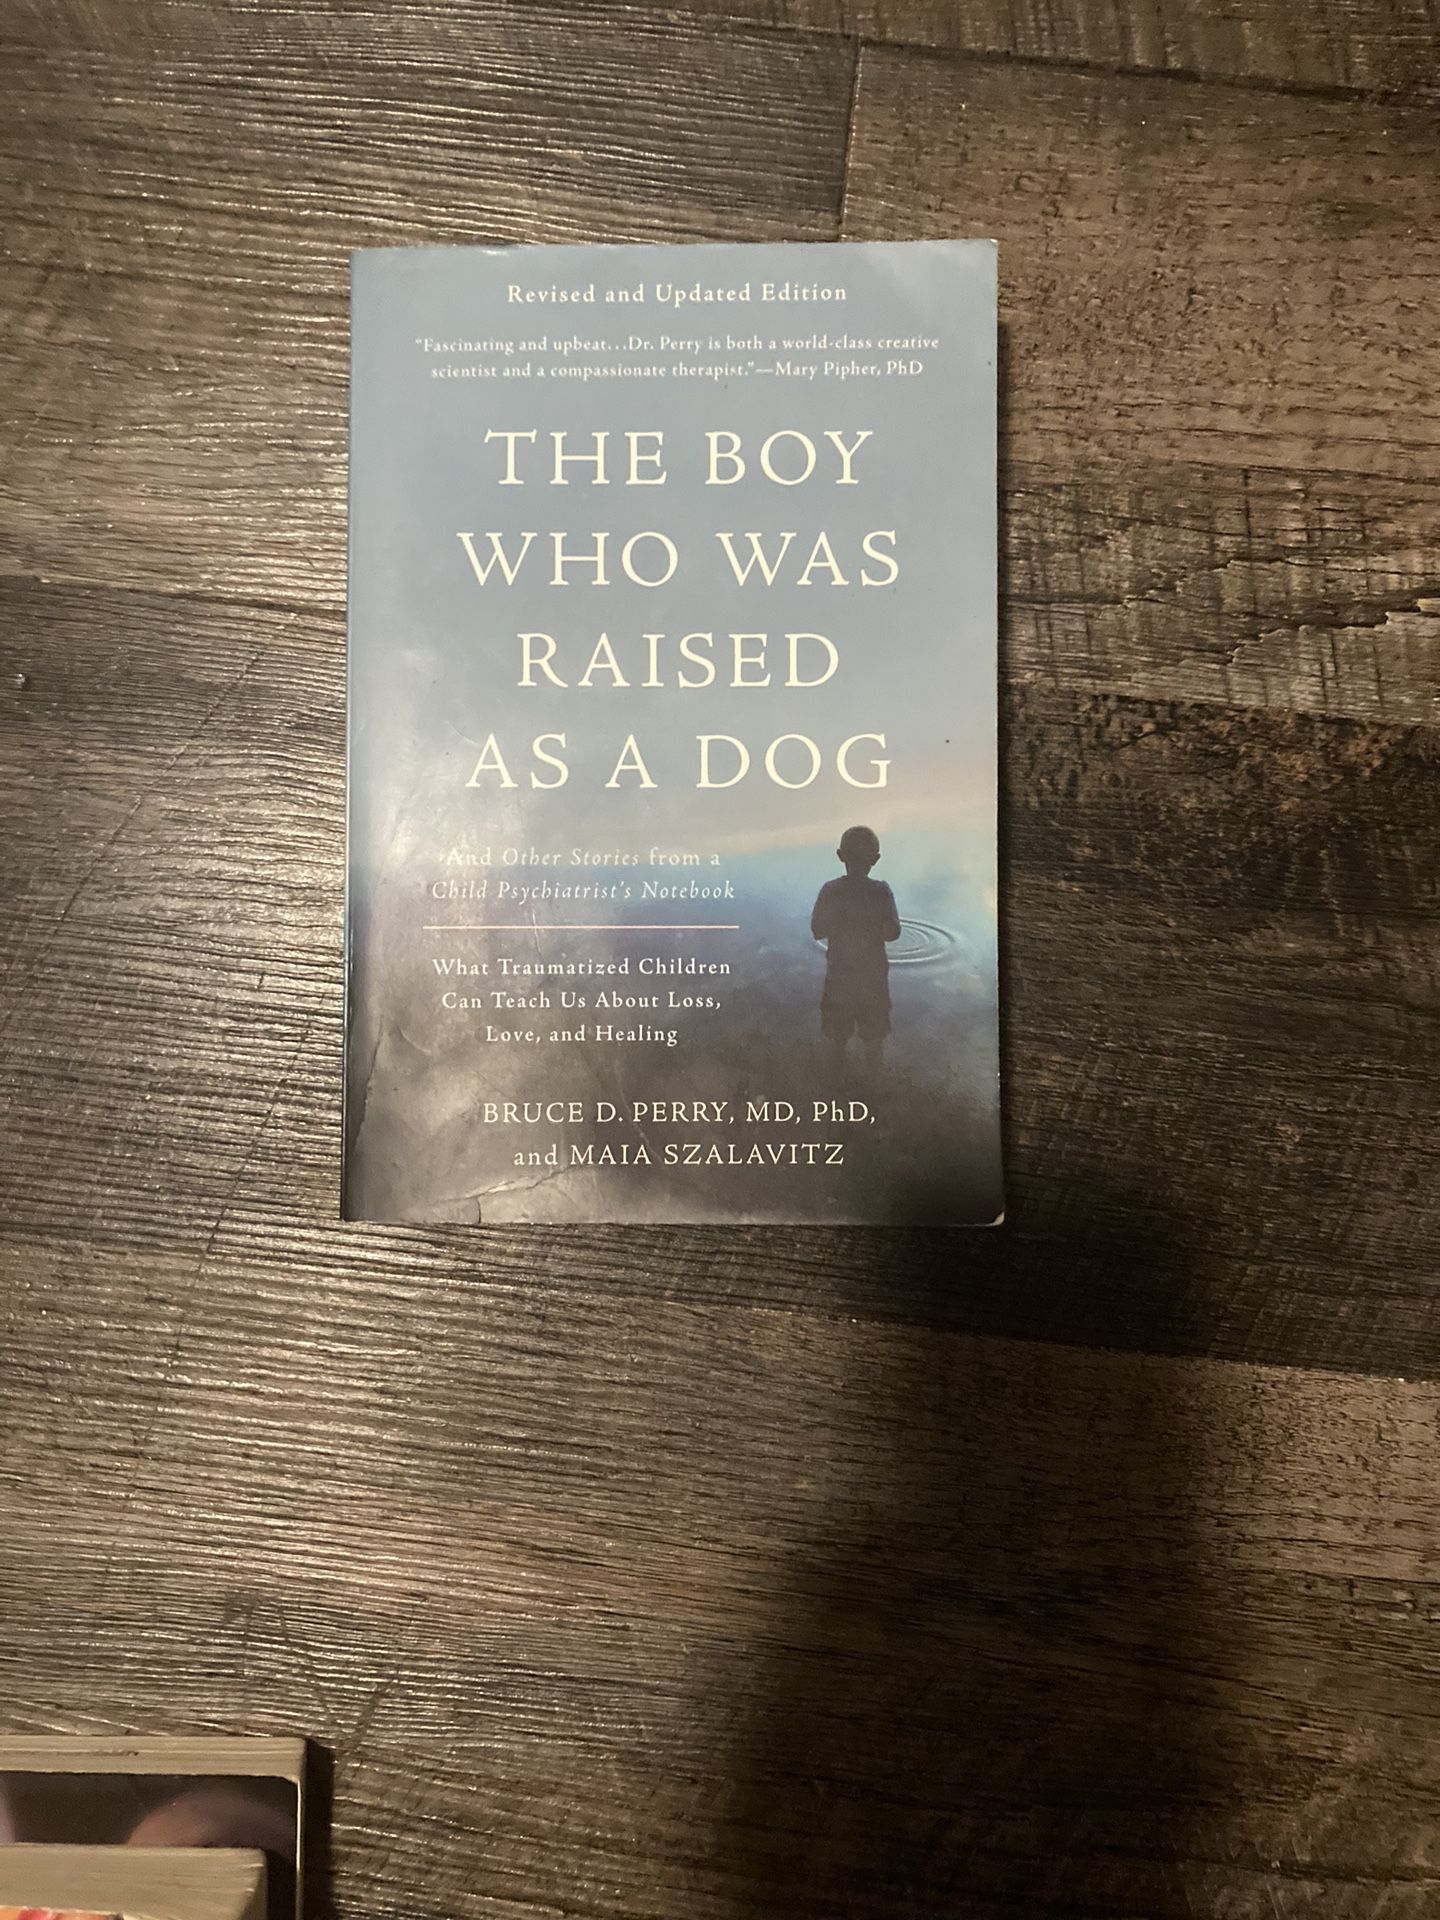 The Boy Who was raised as a dog